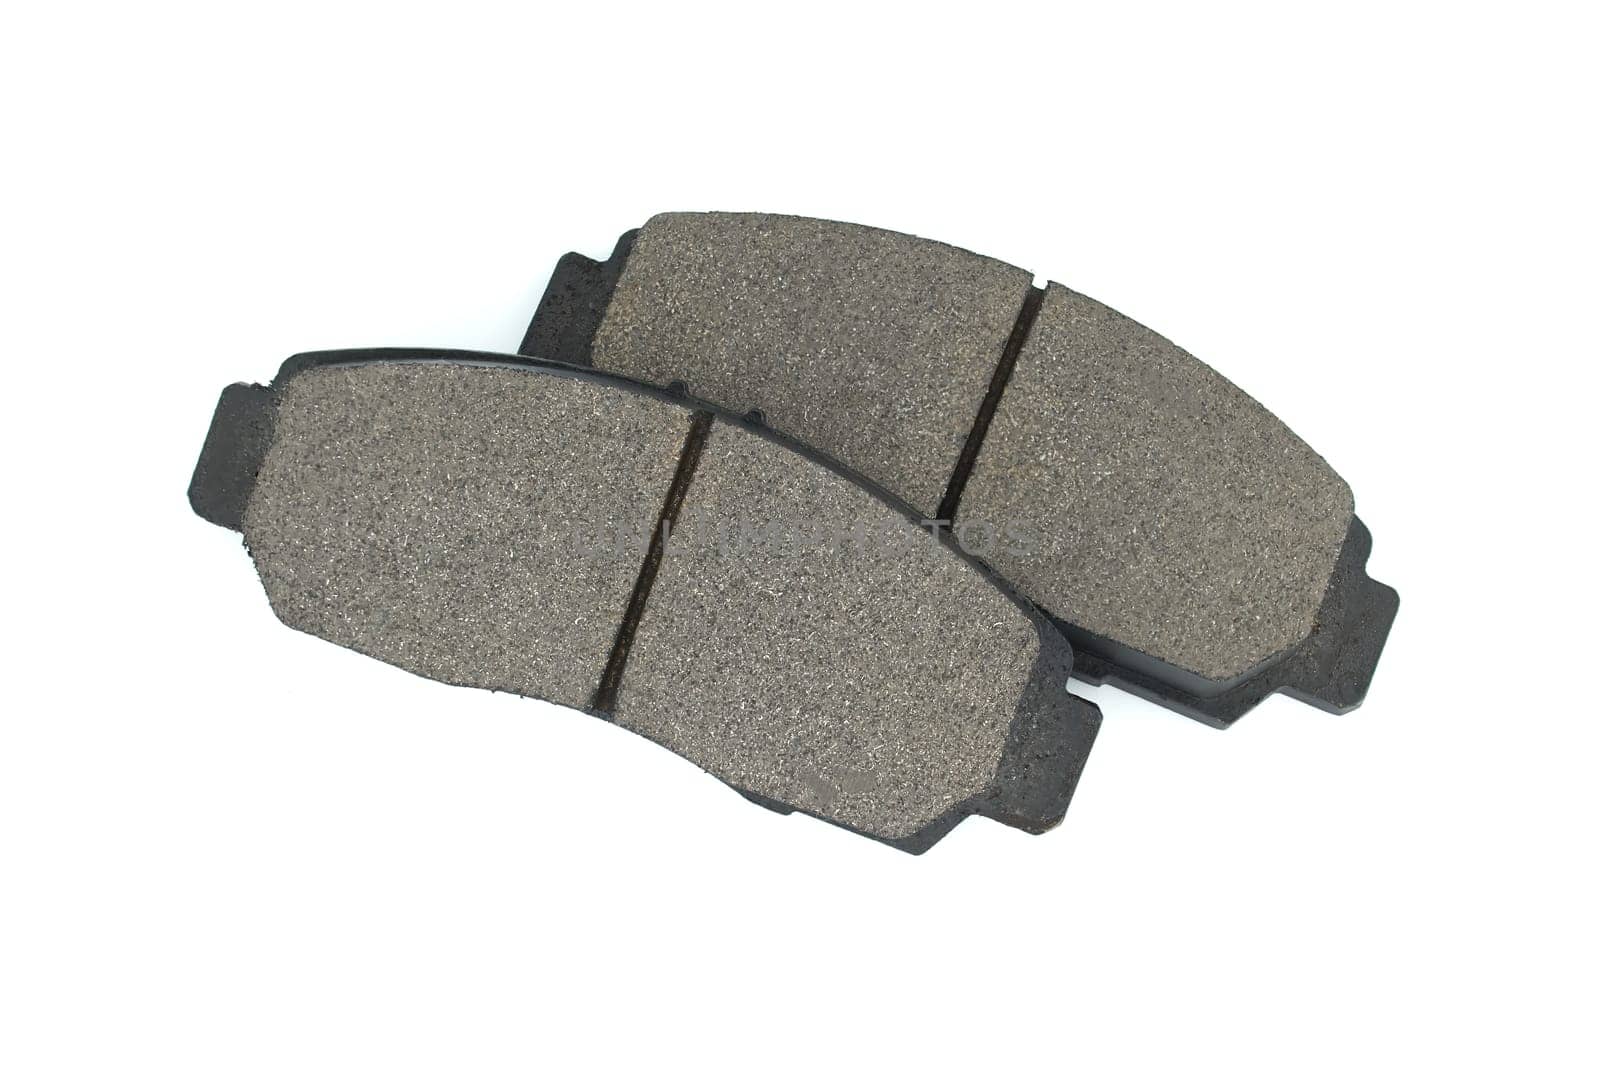 New auto brake pads isolated on white background by NetPix